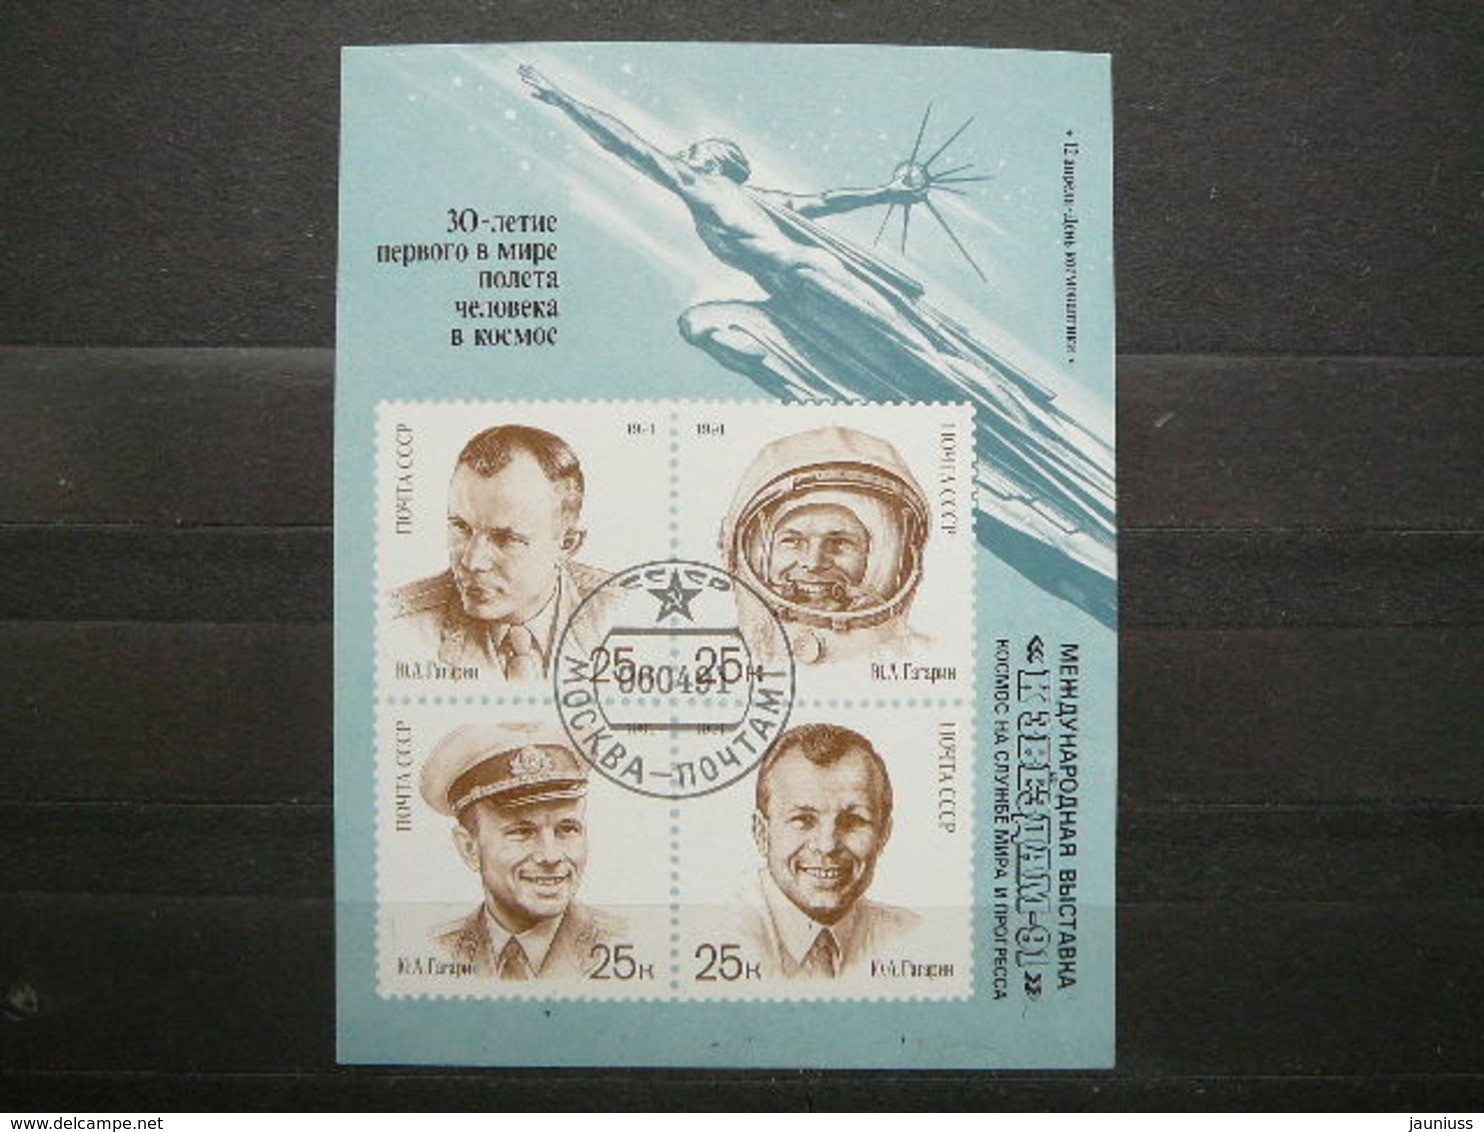 First Man In Space # Russia USSR Sowjetunion # 1991 Used # Mi.6185/8 Block219 - Used Stamps